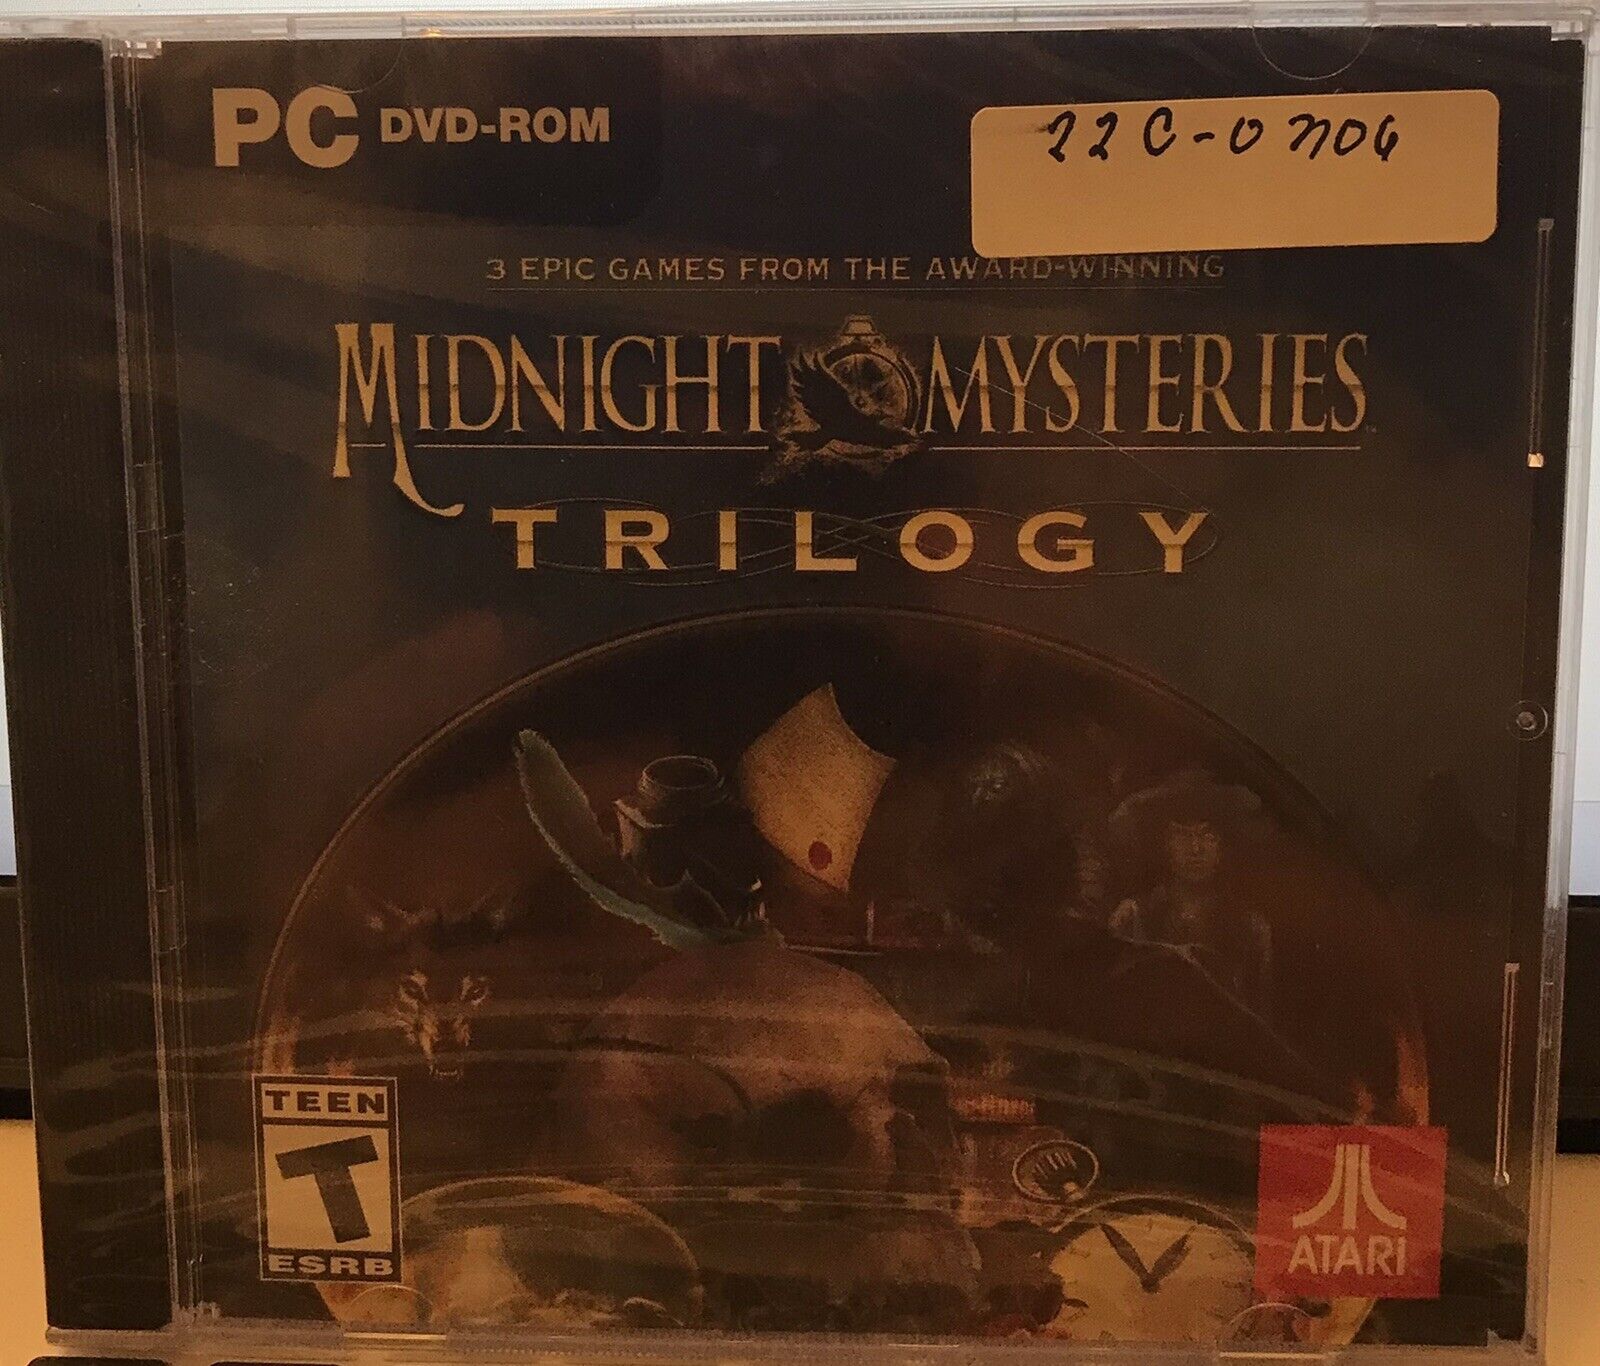 Midnight Mysteries Trilogy By Atari PC DVD-ROM 3 Hidden Object Computer Game